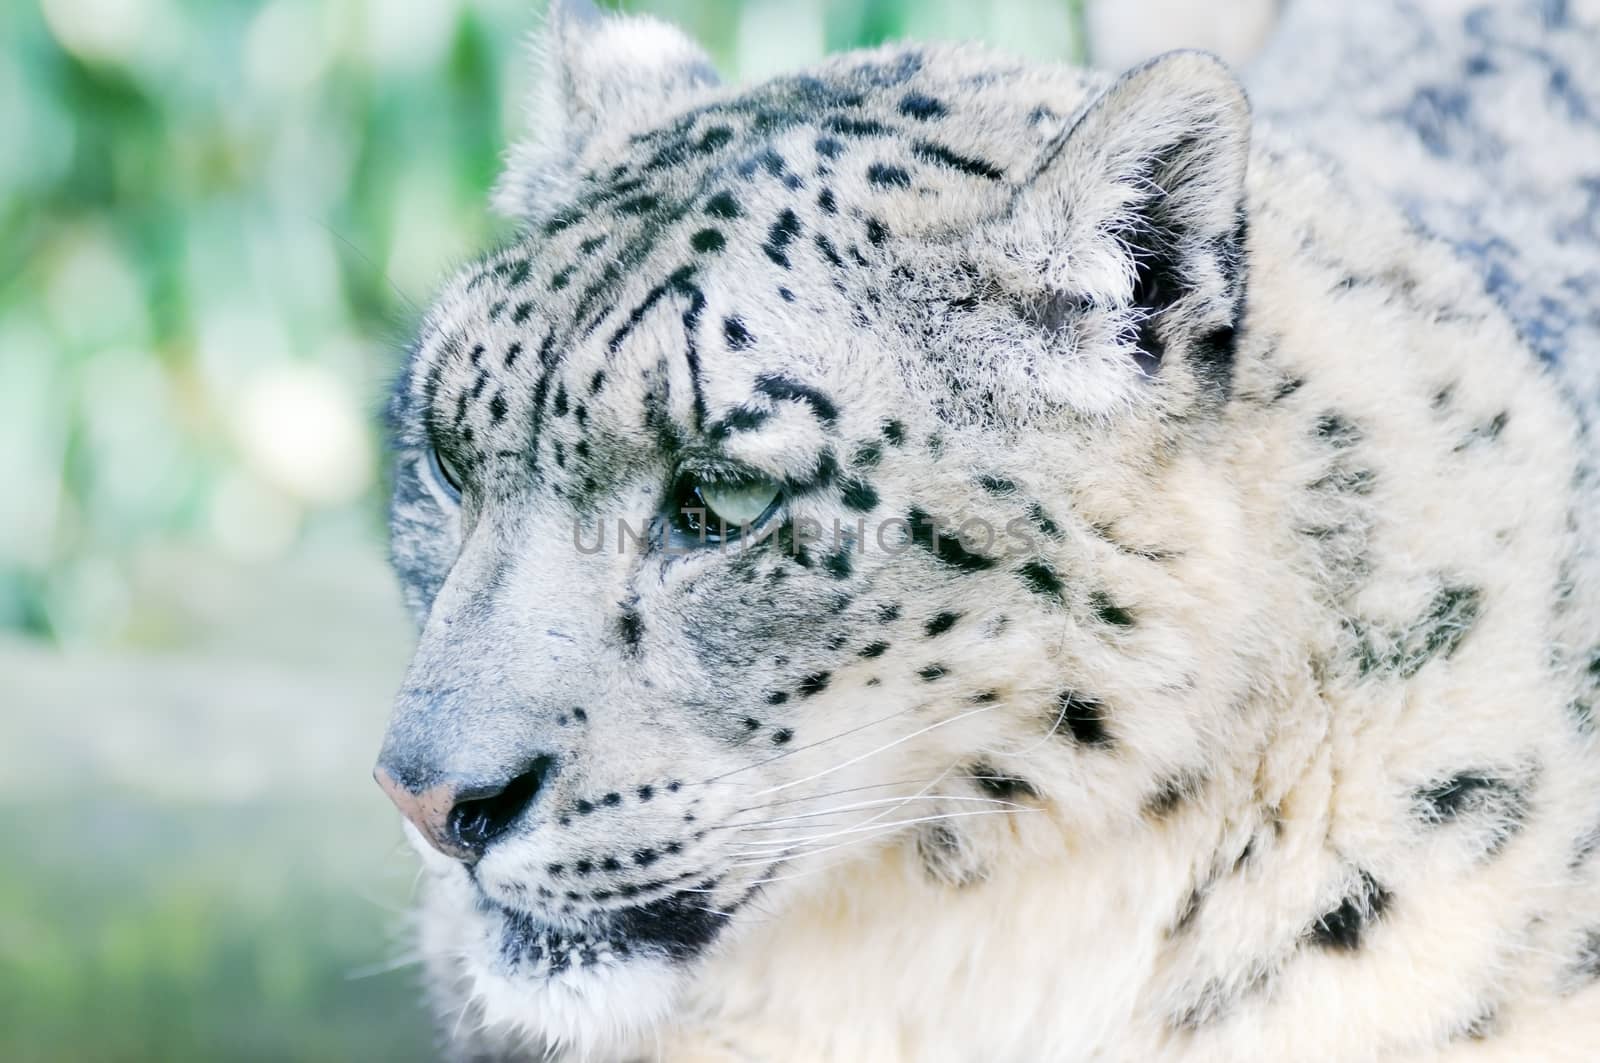 Snow Leopard Camouflage by kmwphotography